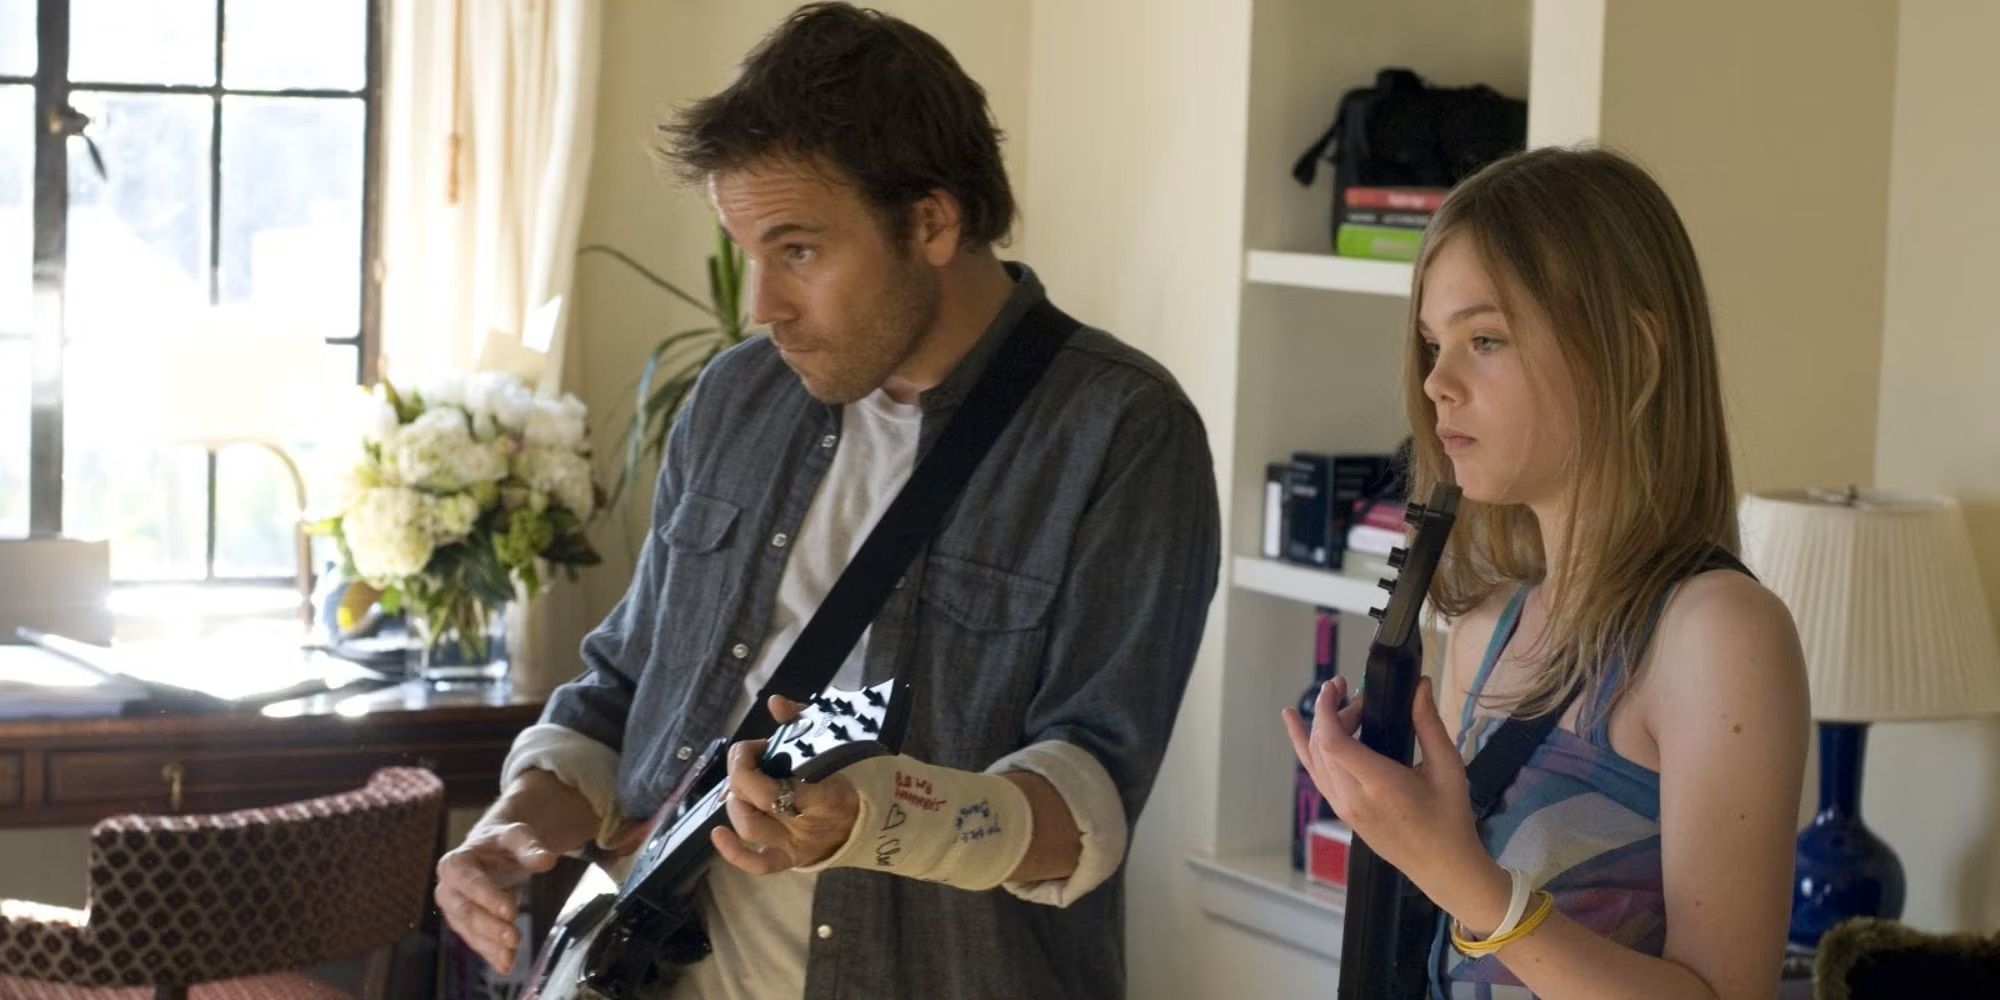 Stephen Dorff and Elle Fanning in 'Somewhere' playing guitar.